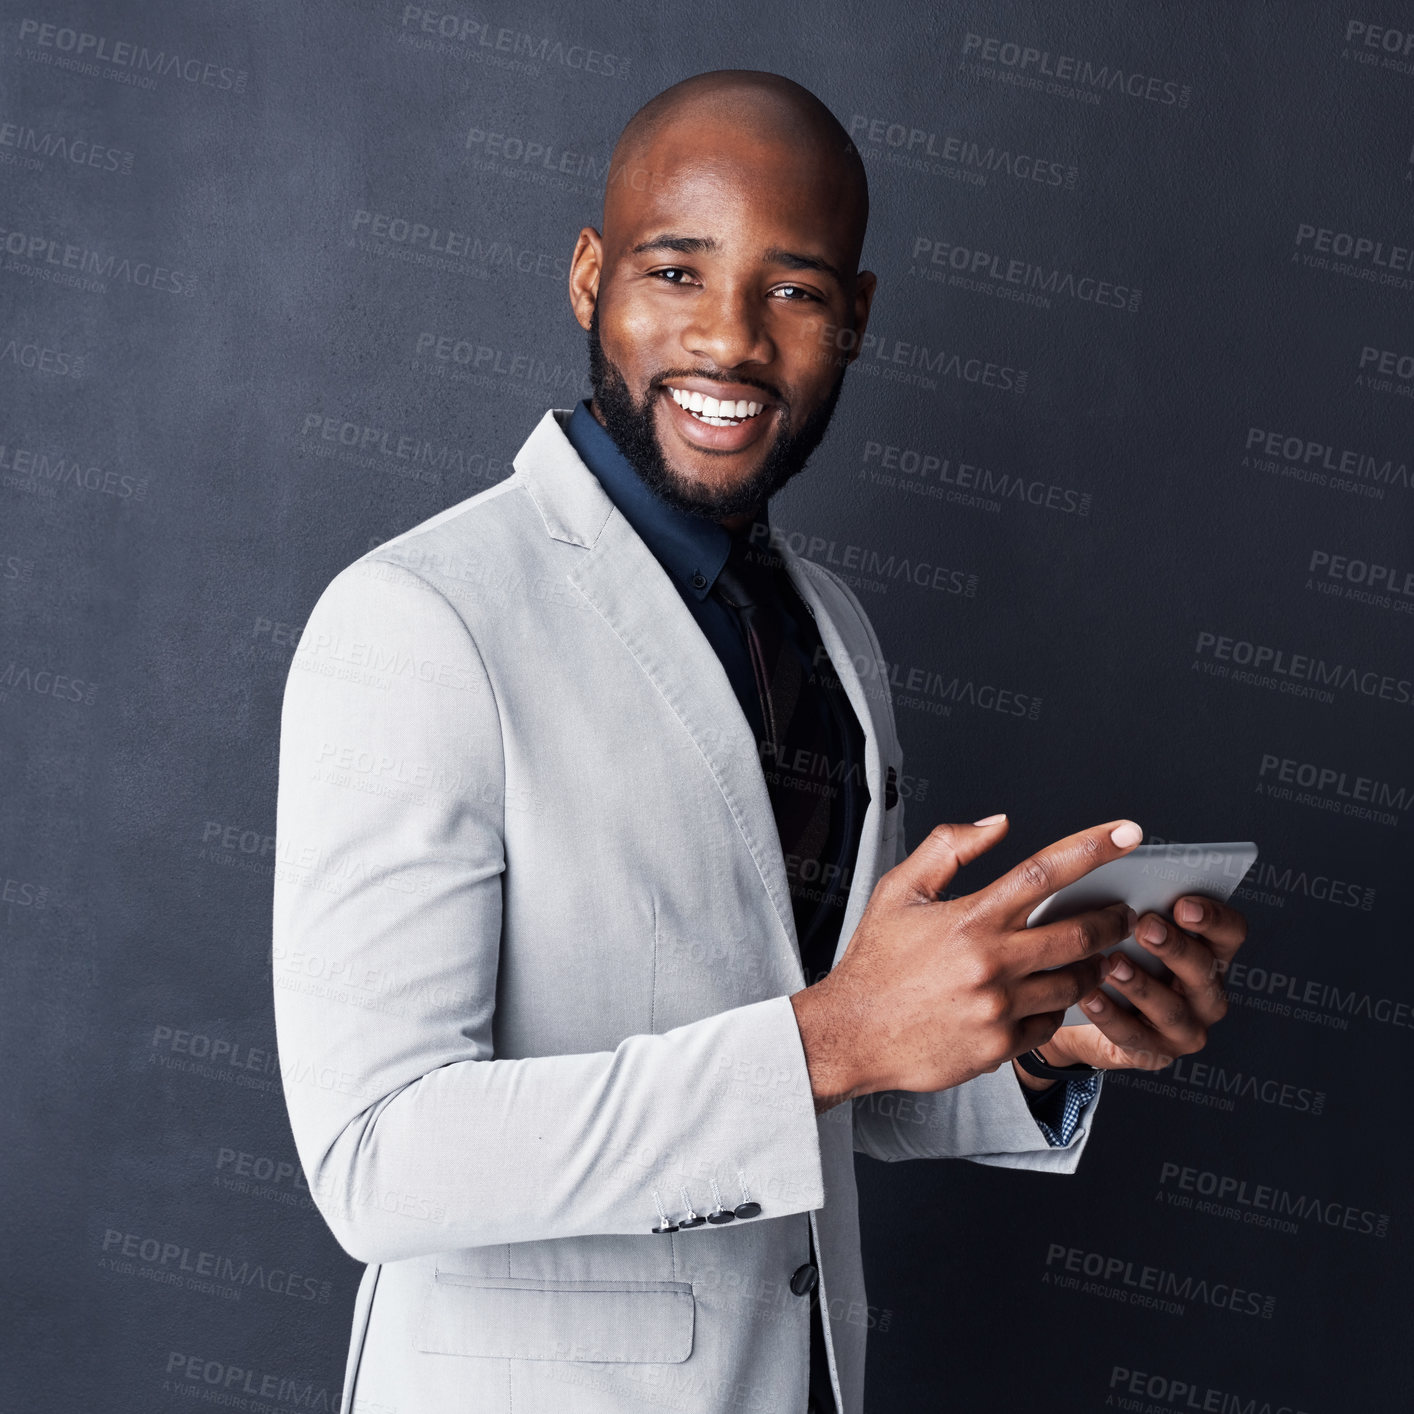 Buy stock photo Studio shot of a businessman using a digital tablet against a gray background